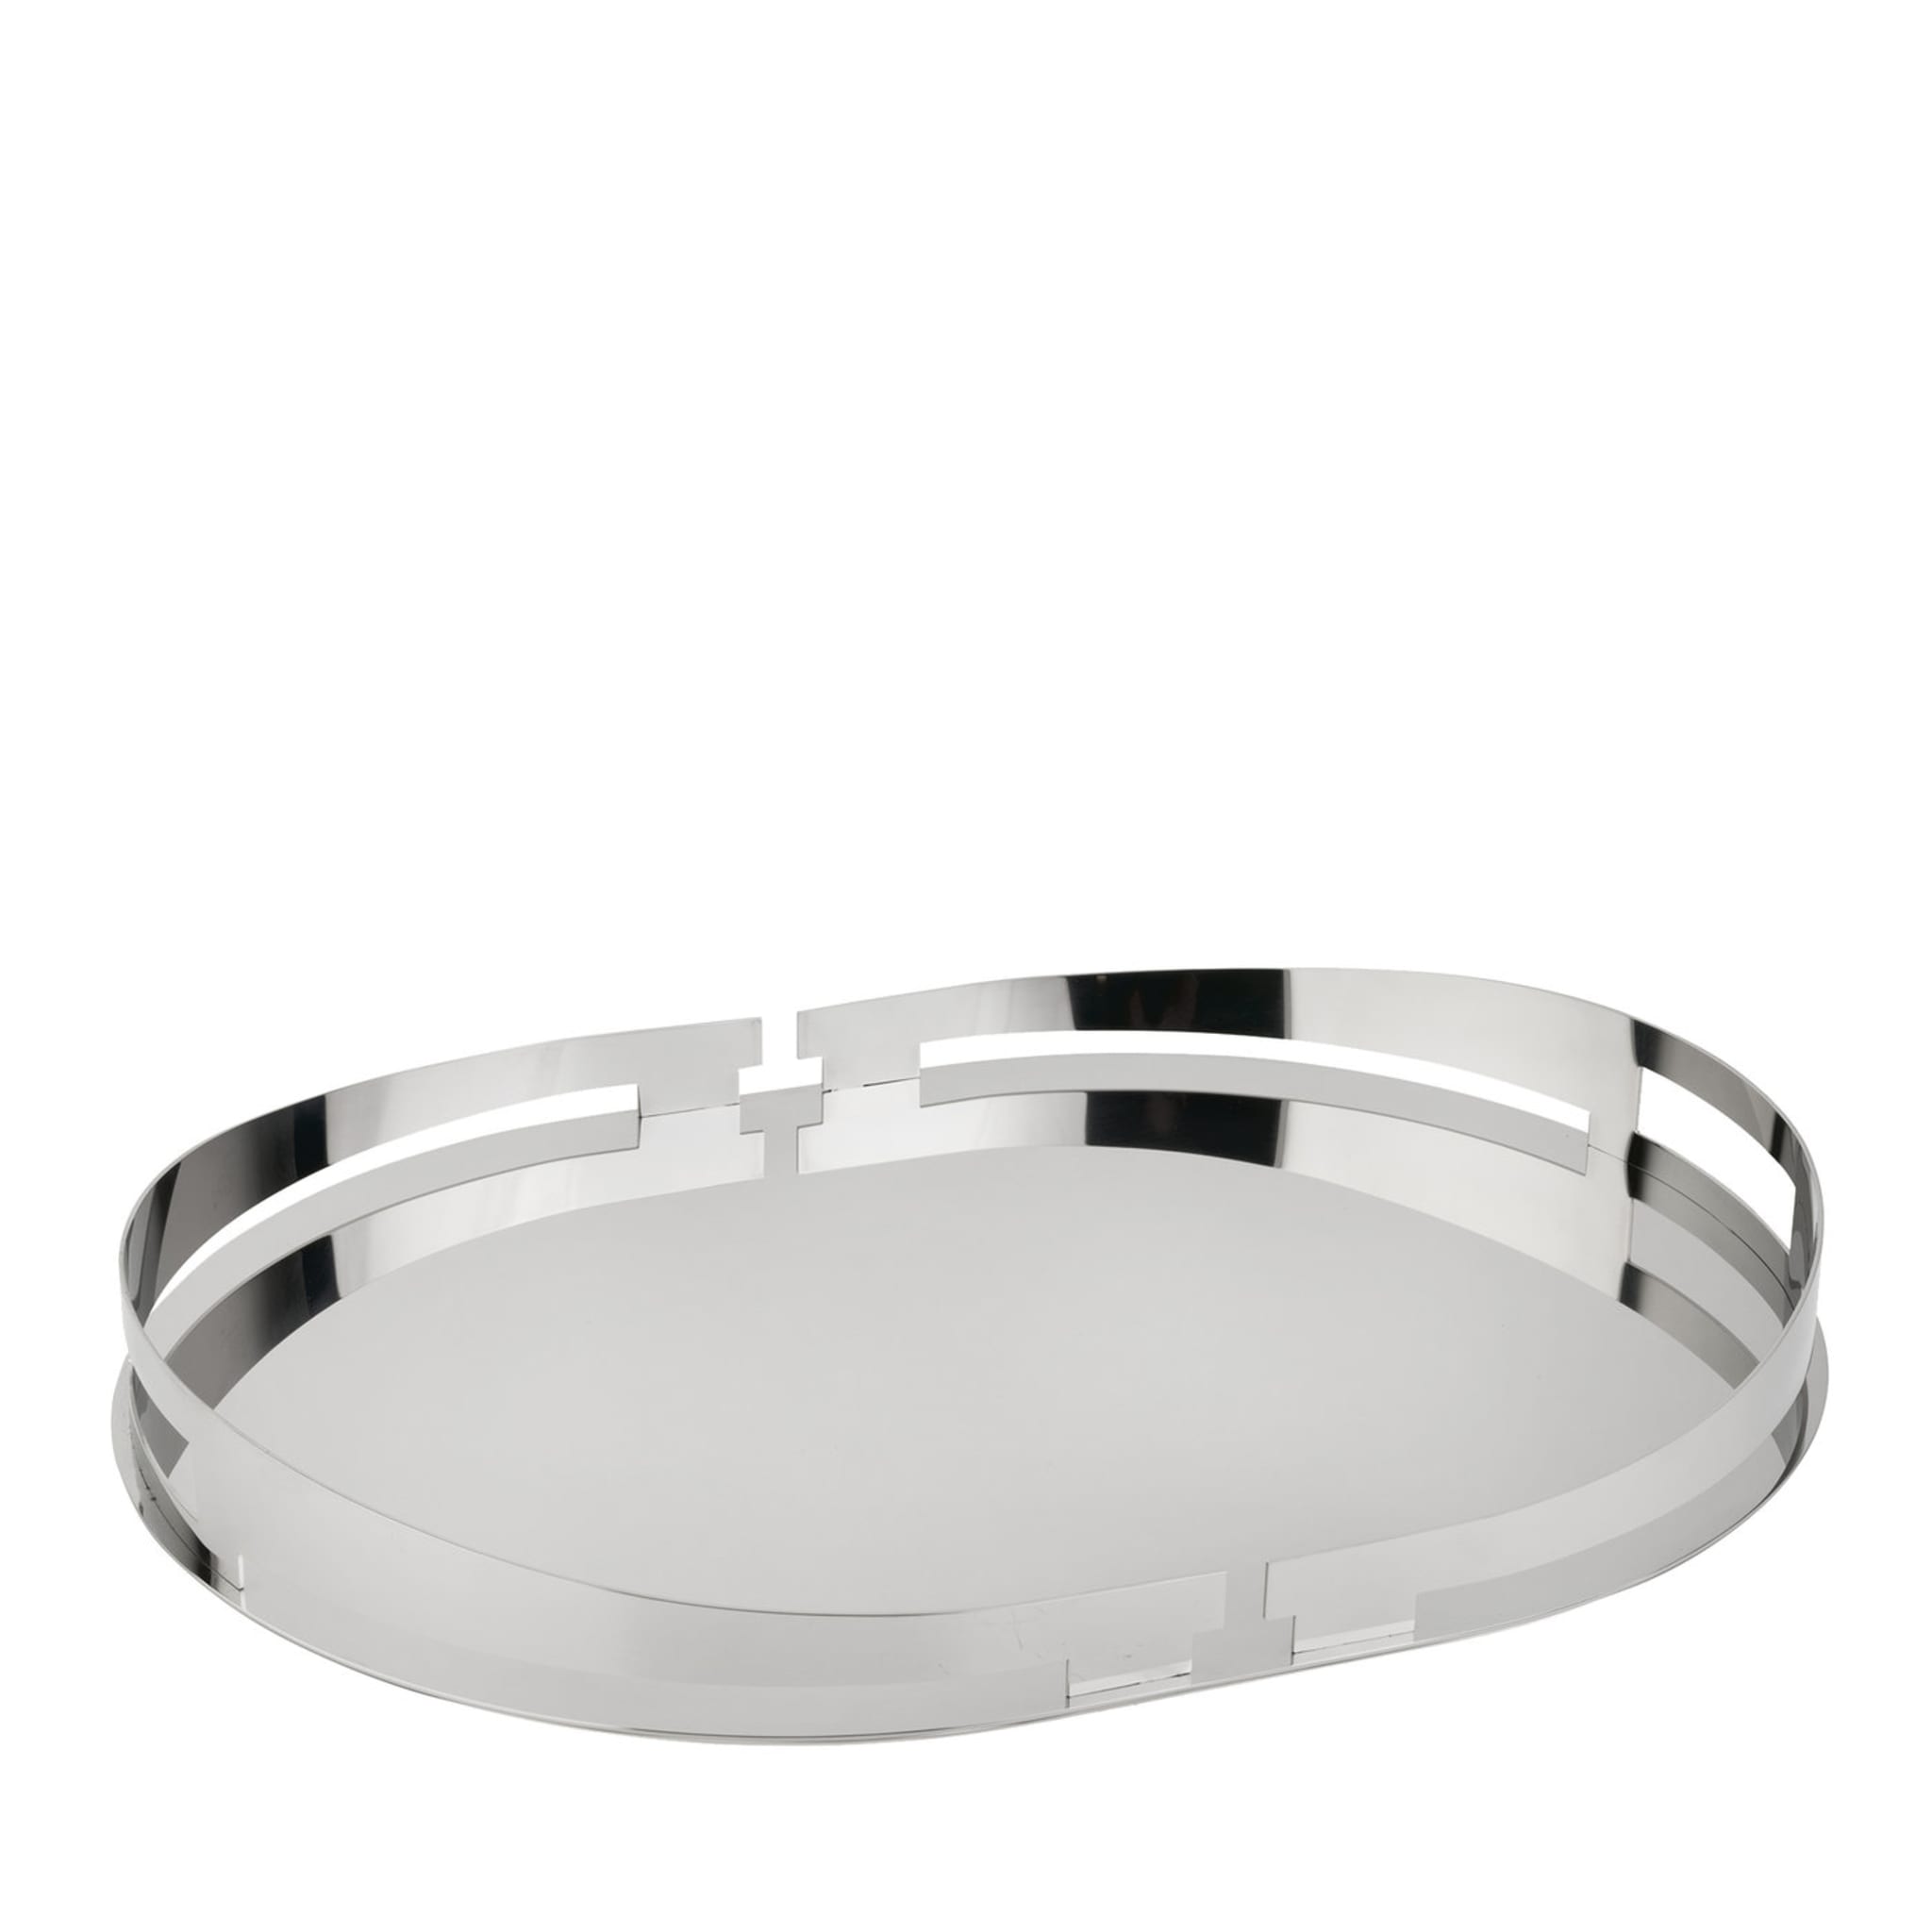 Oval Stainless Steel Tray - Main view